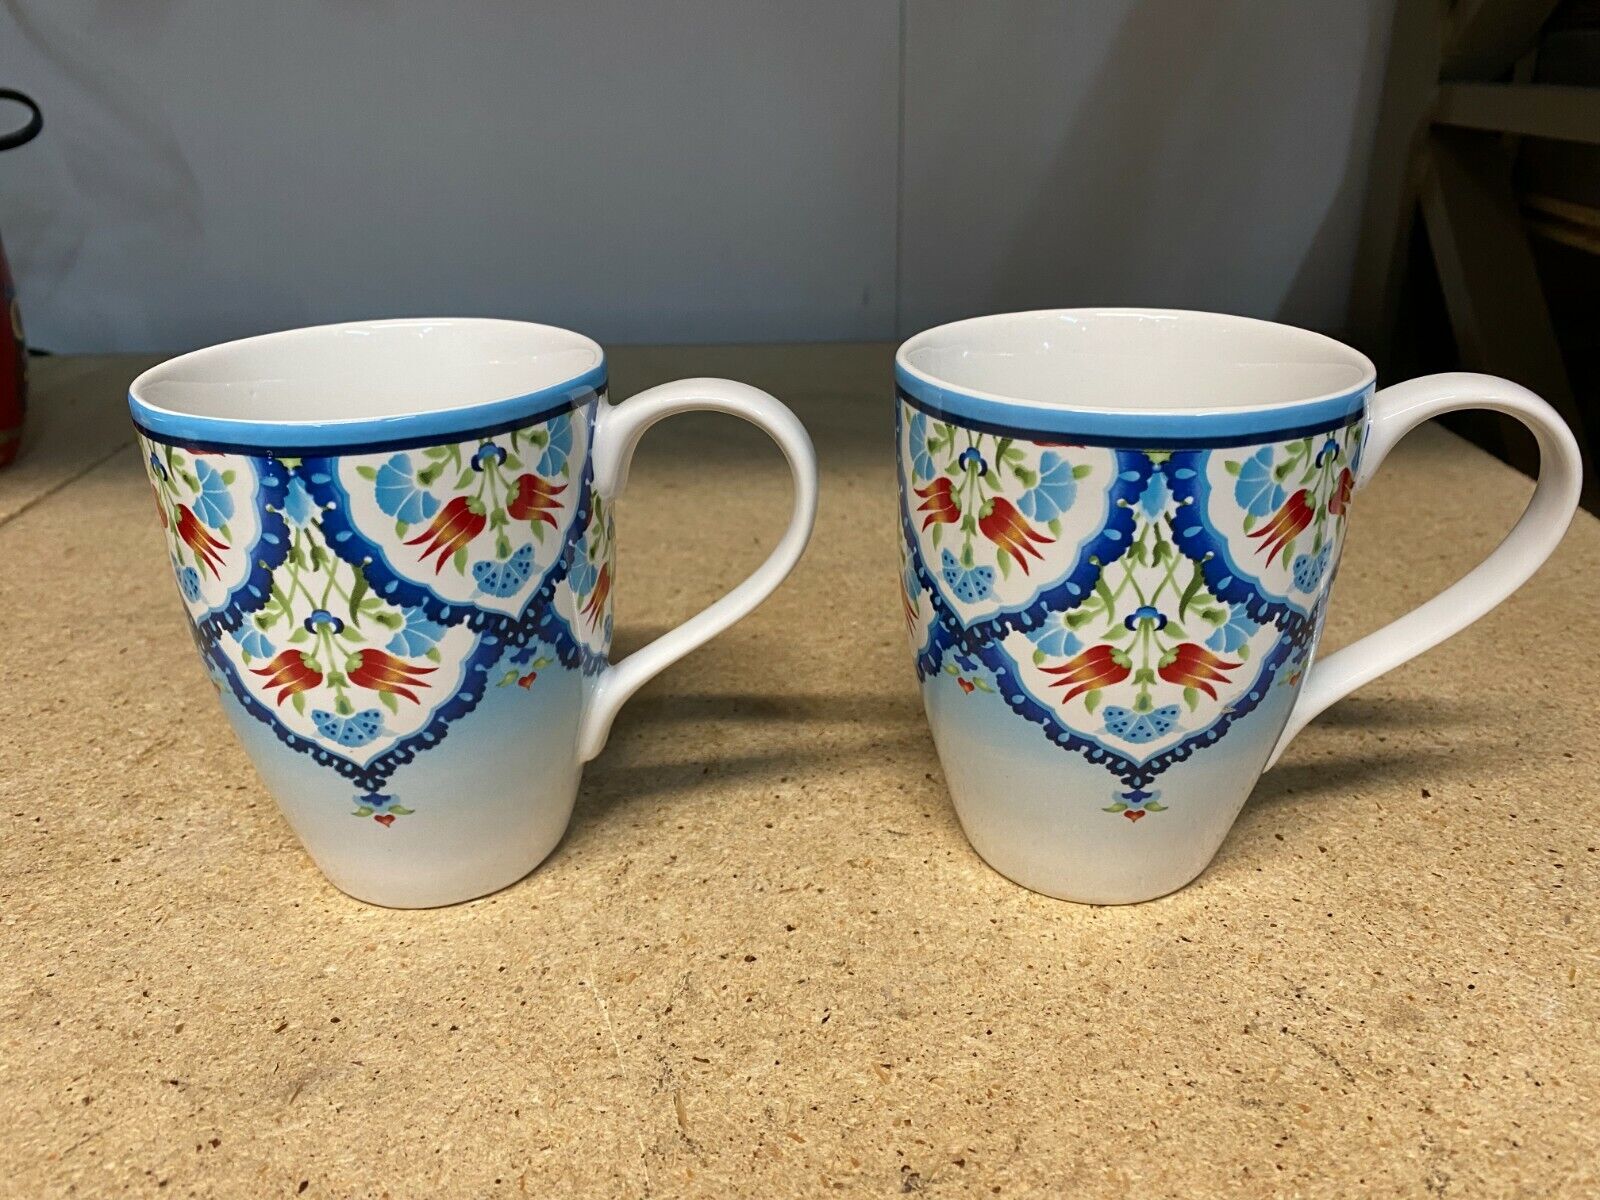 Set of 2 222 FIFTH Porcelain Tunisia Blue and Red Floral Mugs Cups 